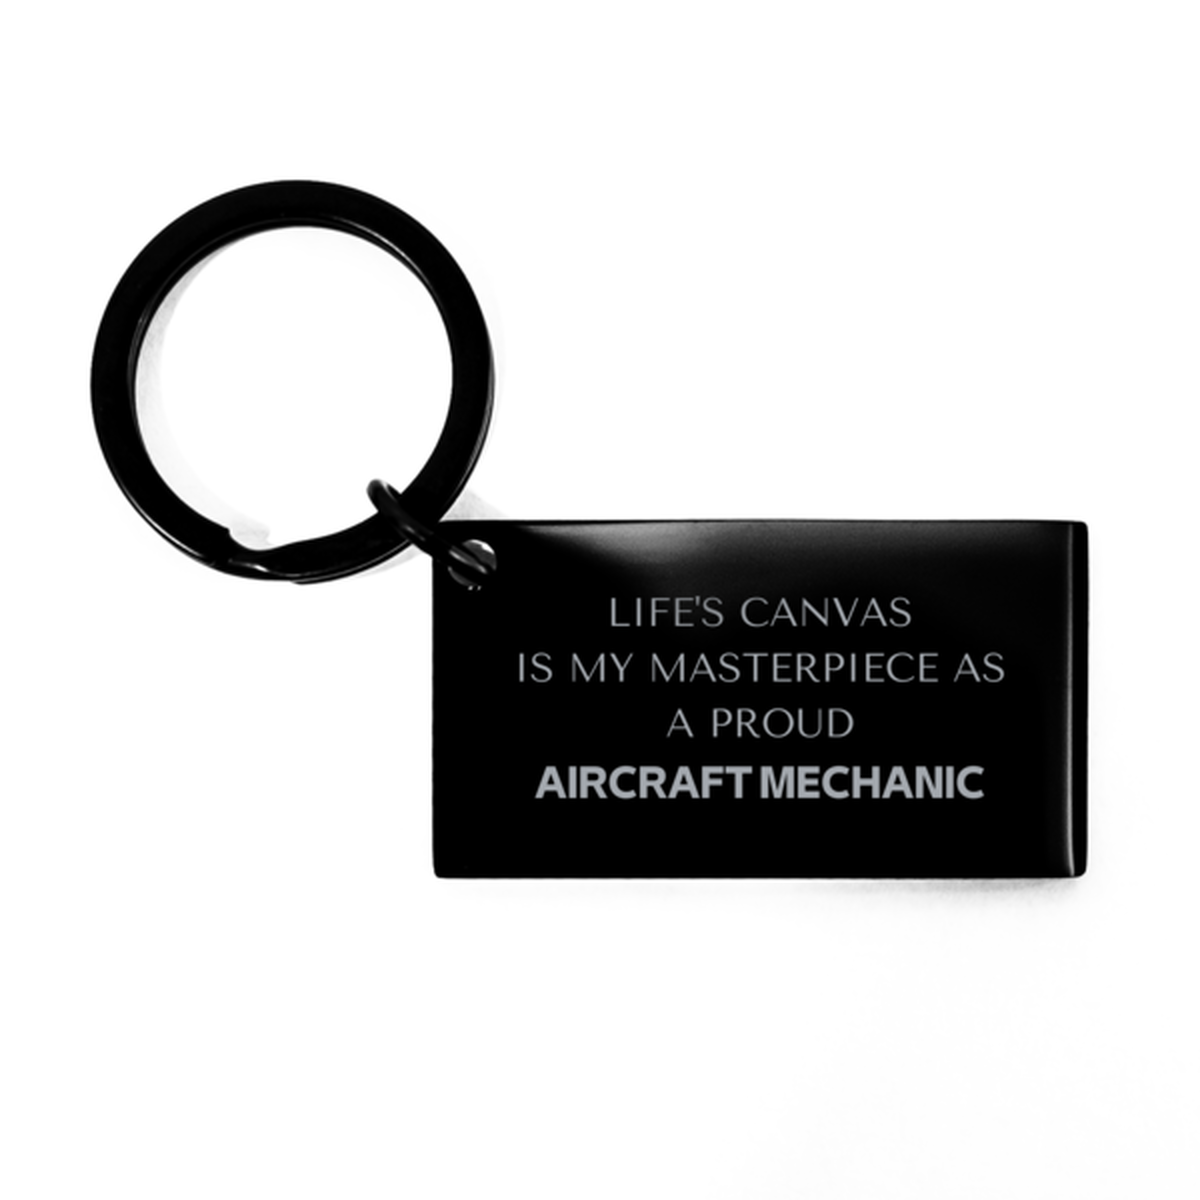 Proud Aircraft Mechanic Gifts, Life's canvas is my masterpiece, Epic Birthday Christmas Unique Keychain For Aircraft Mechanic, Coworkers, Men, Women, Friends